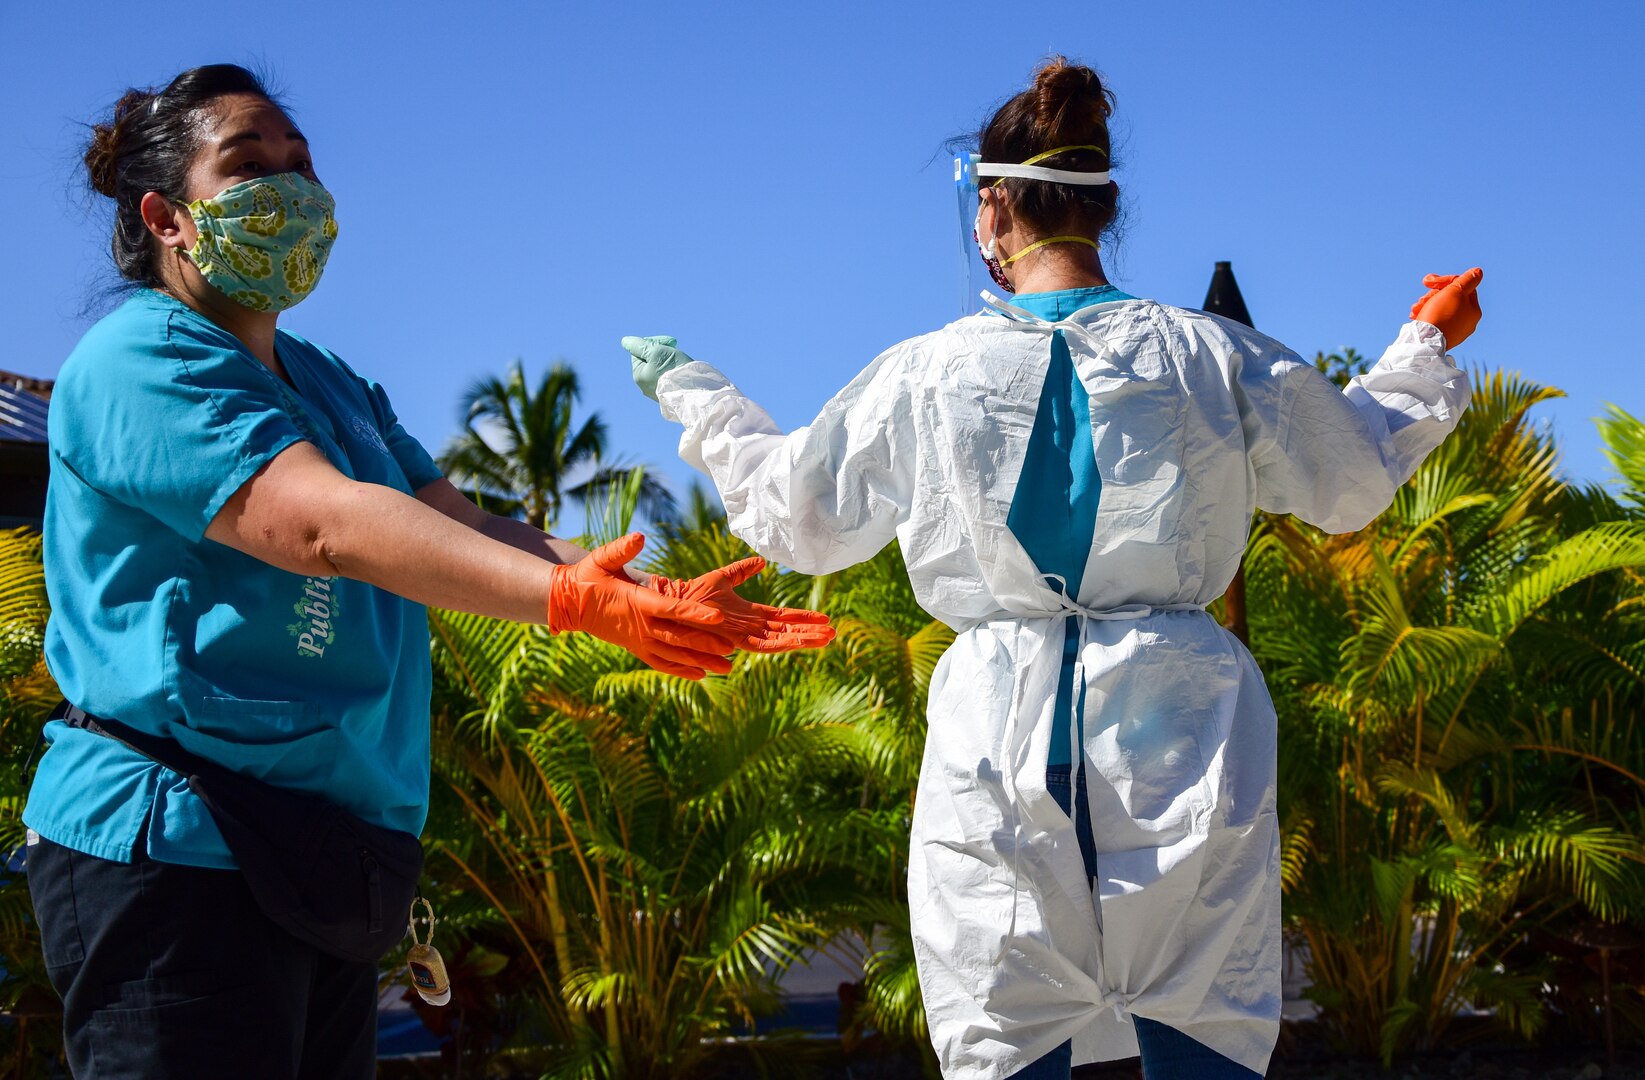 One woman wearing orange protective gloves stretches her arms toward another woman wearing a white personal protective gown outdoors.